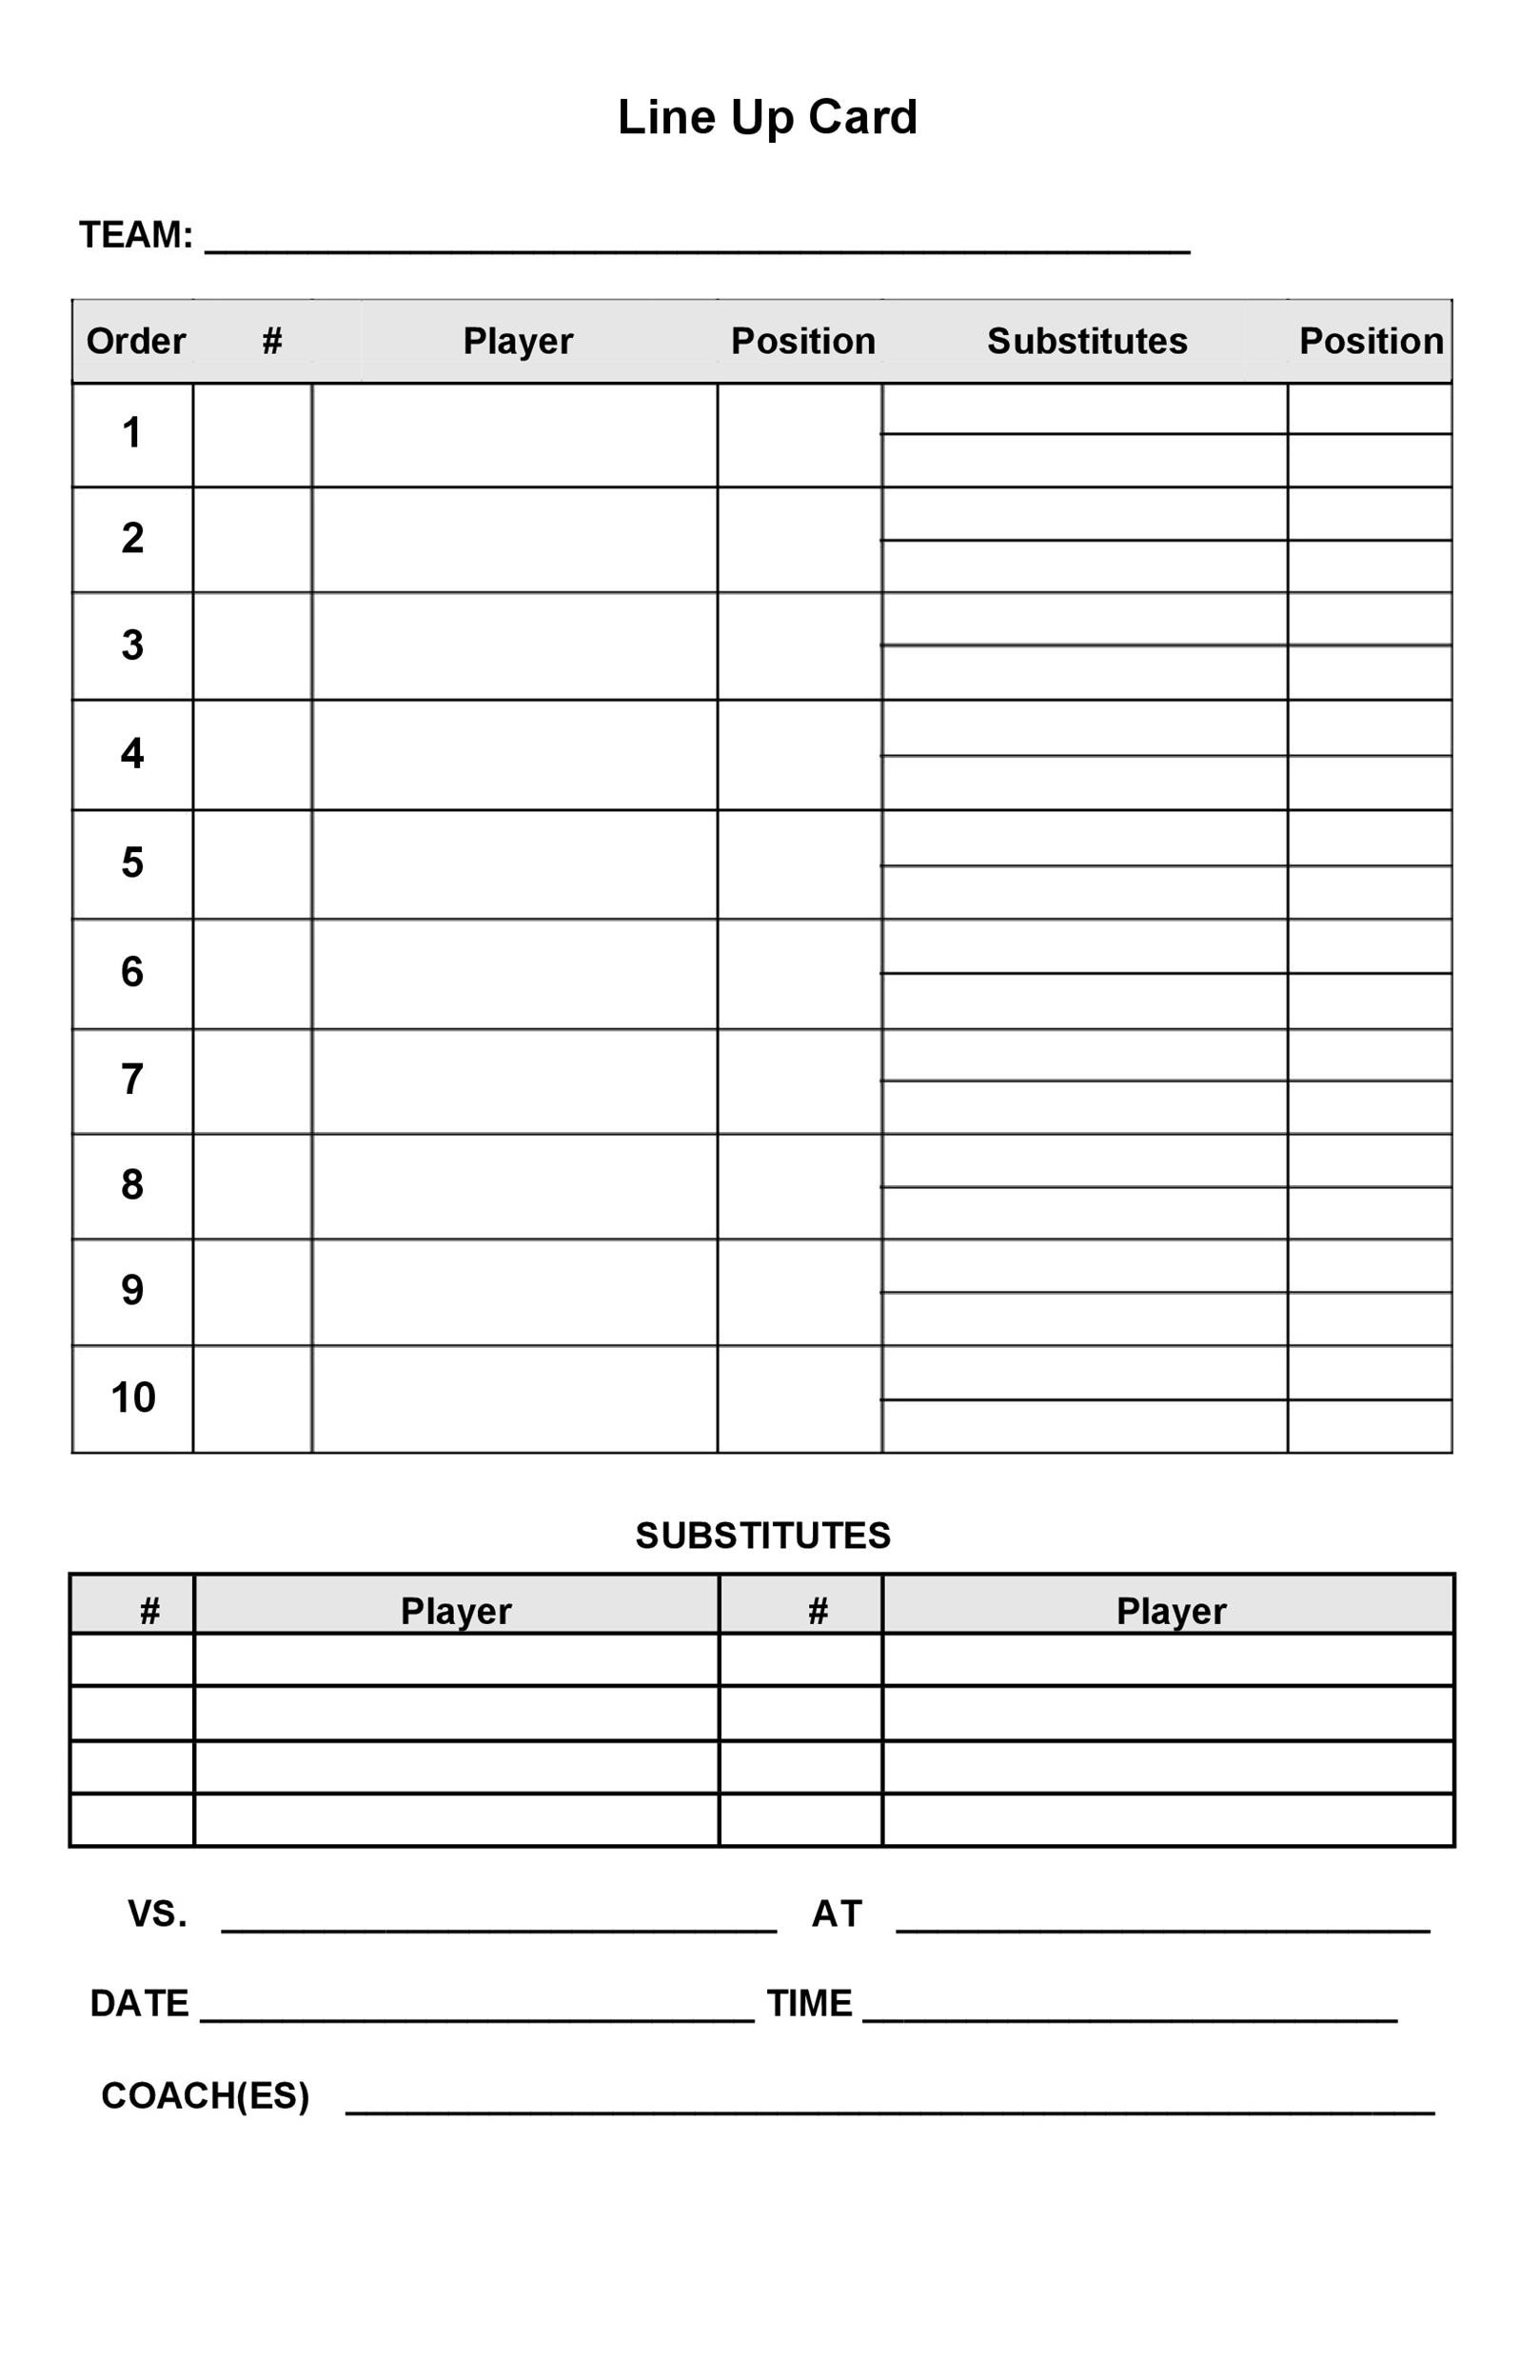 Download Baseball Lineup Cards Images Throughout Baseball Lineup Card Template